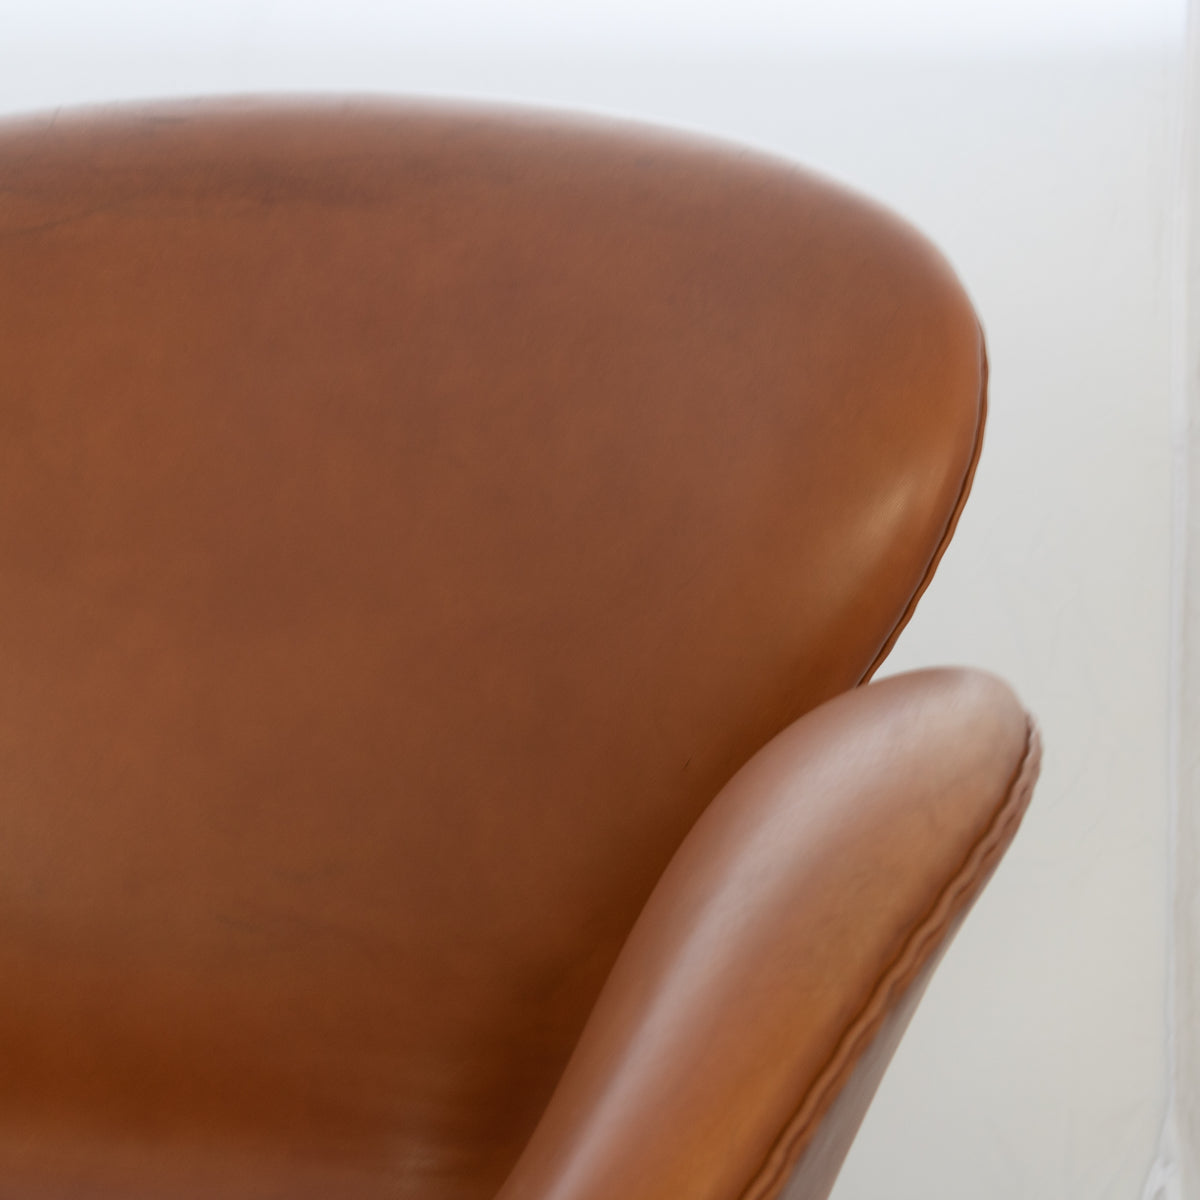 Republic of Fritz Hansen Swan Chairs in Leather (sef of 4) | The Architectural Forum